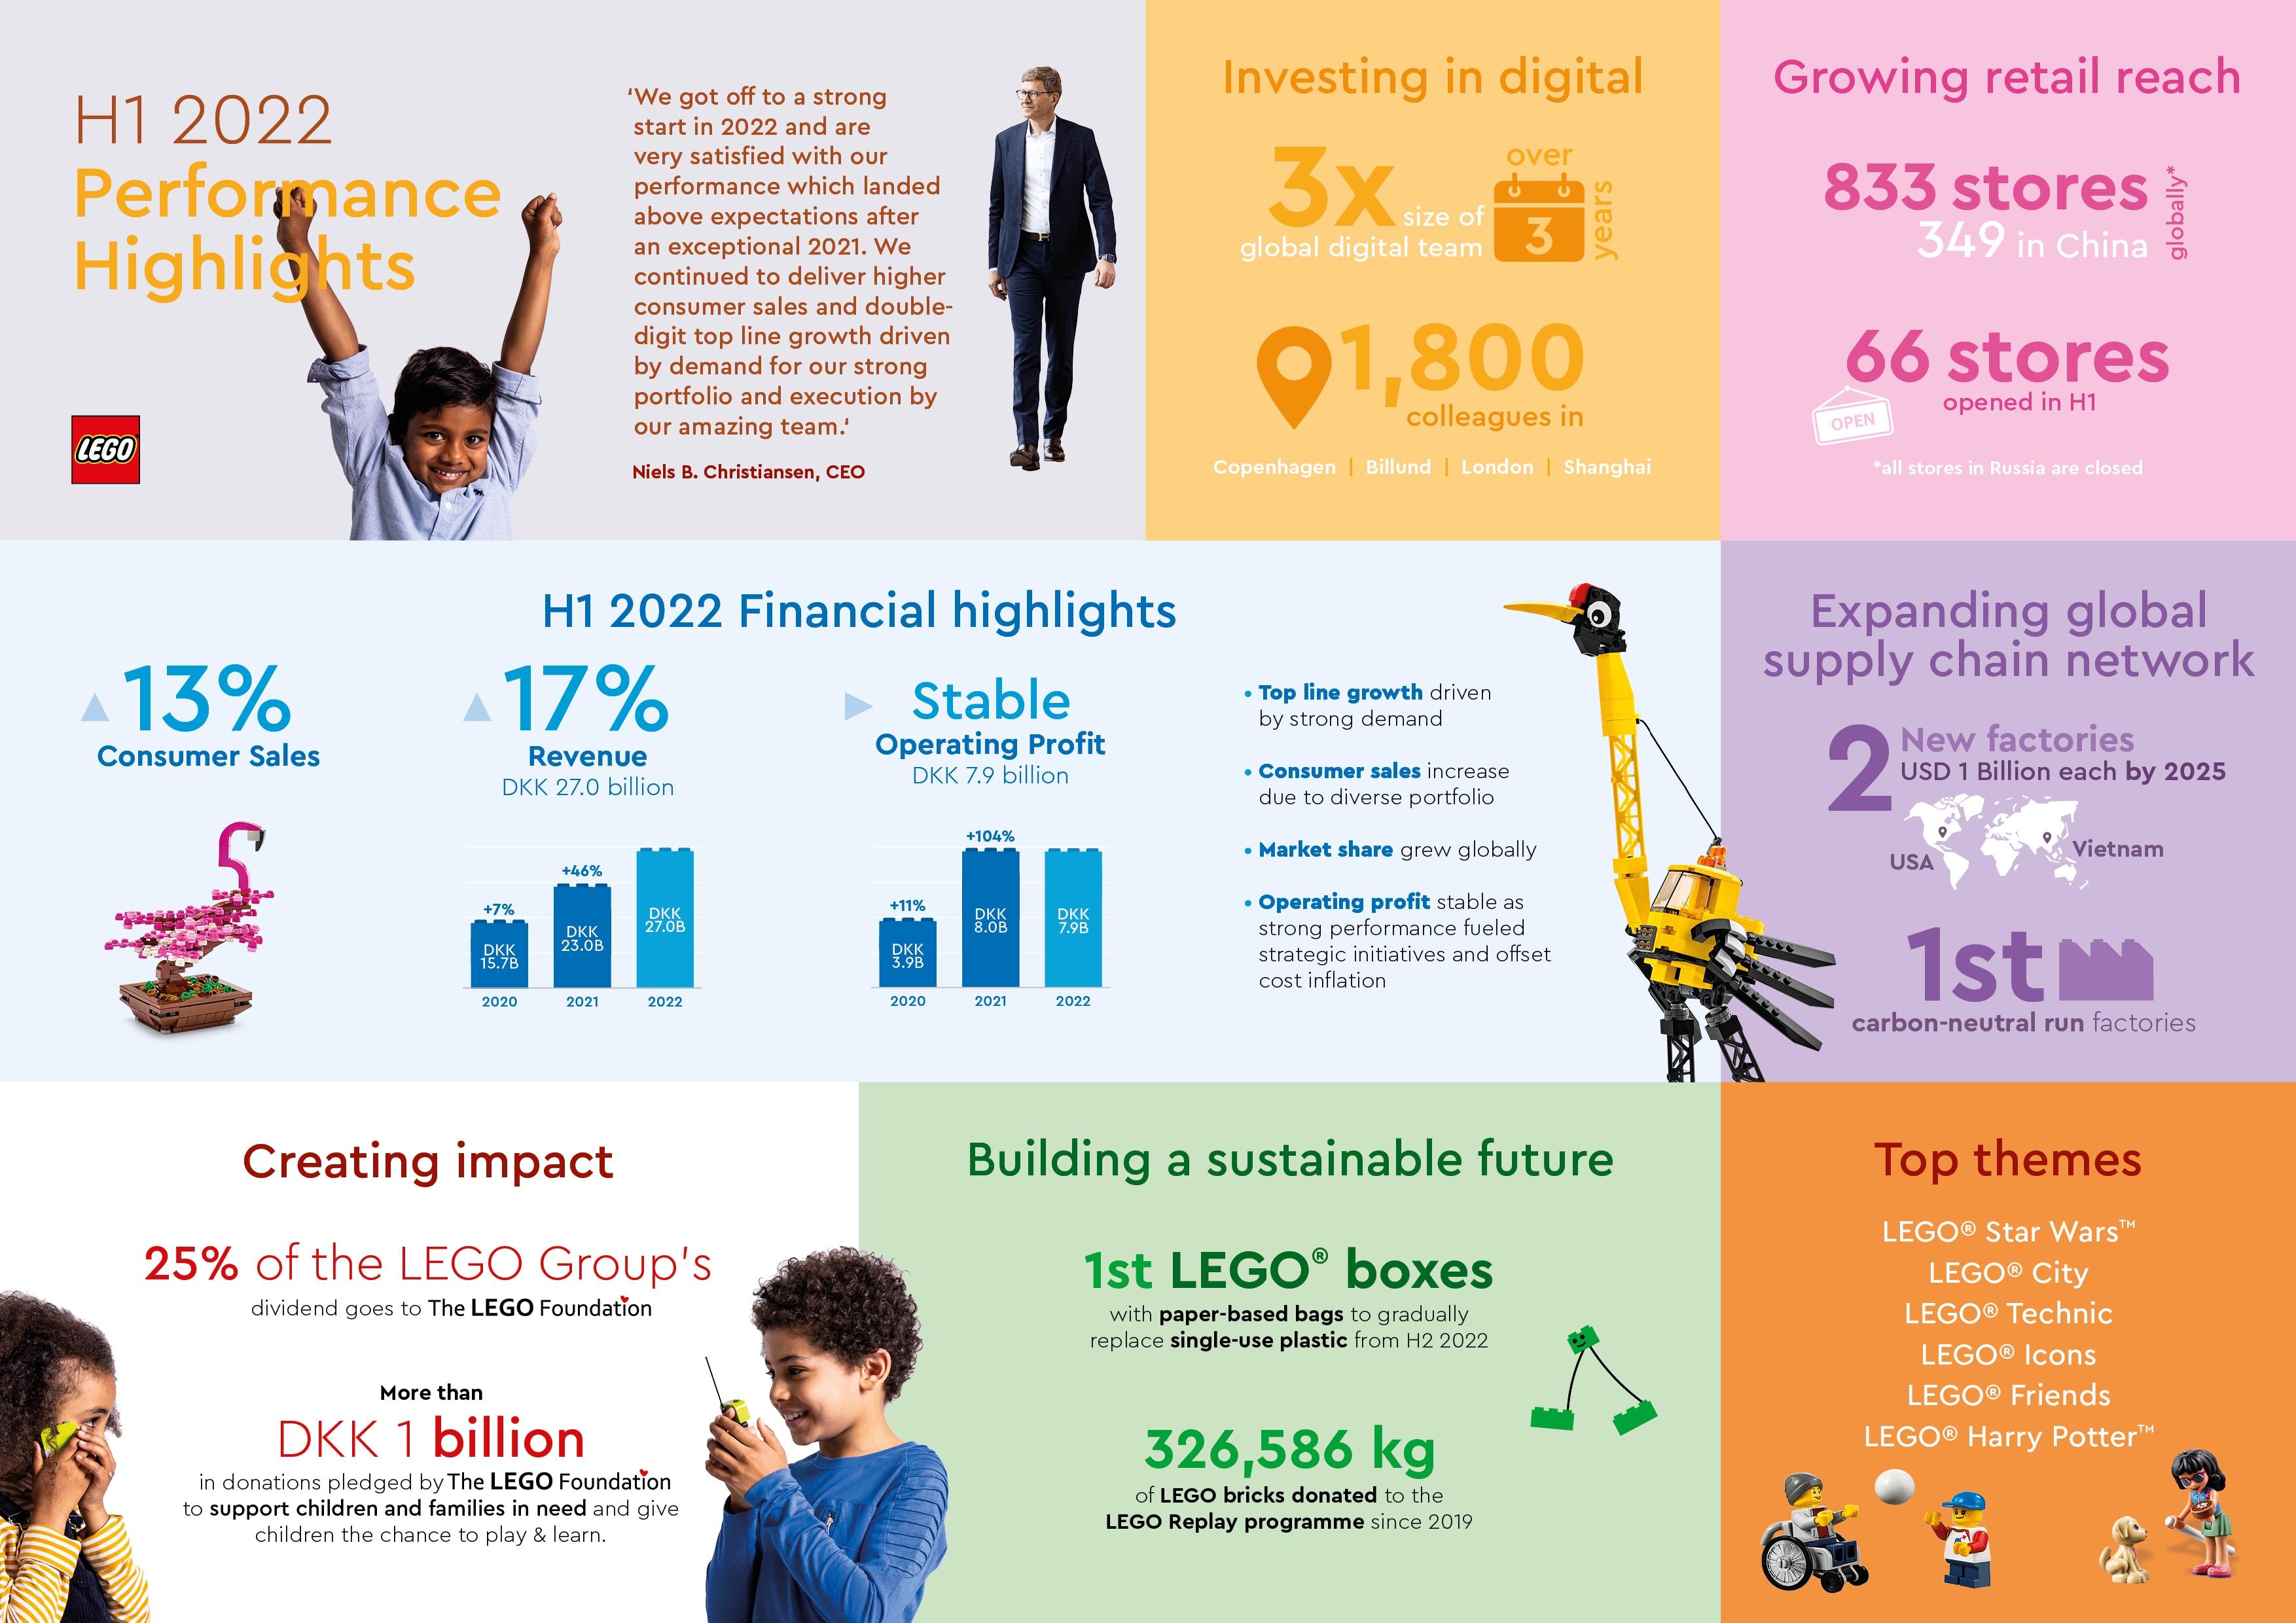 Nu Blinke Diplomati The LEGO Group delivers top line growth in H1 2022 while accelerating strategic  growth initiatives - About Us - LEGO.com